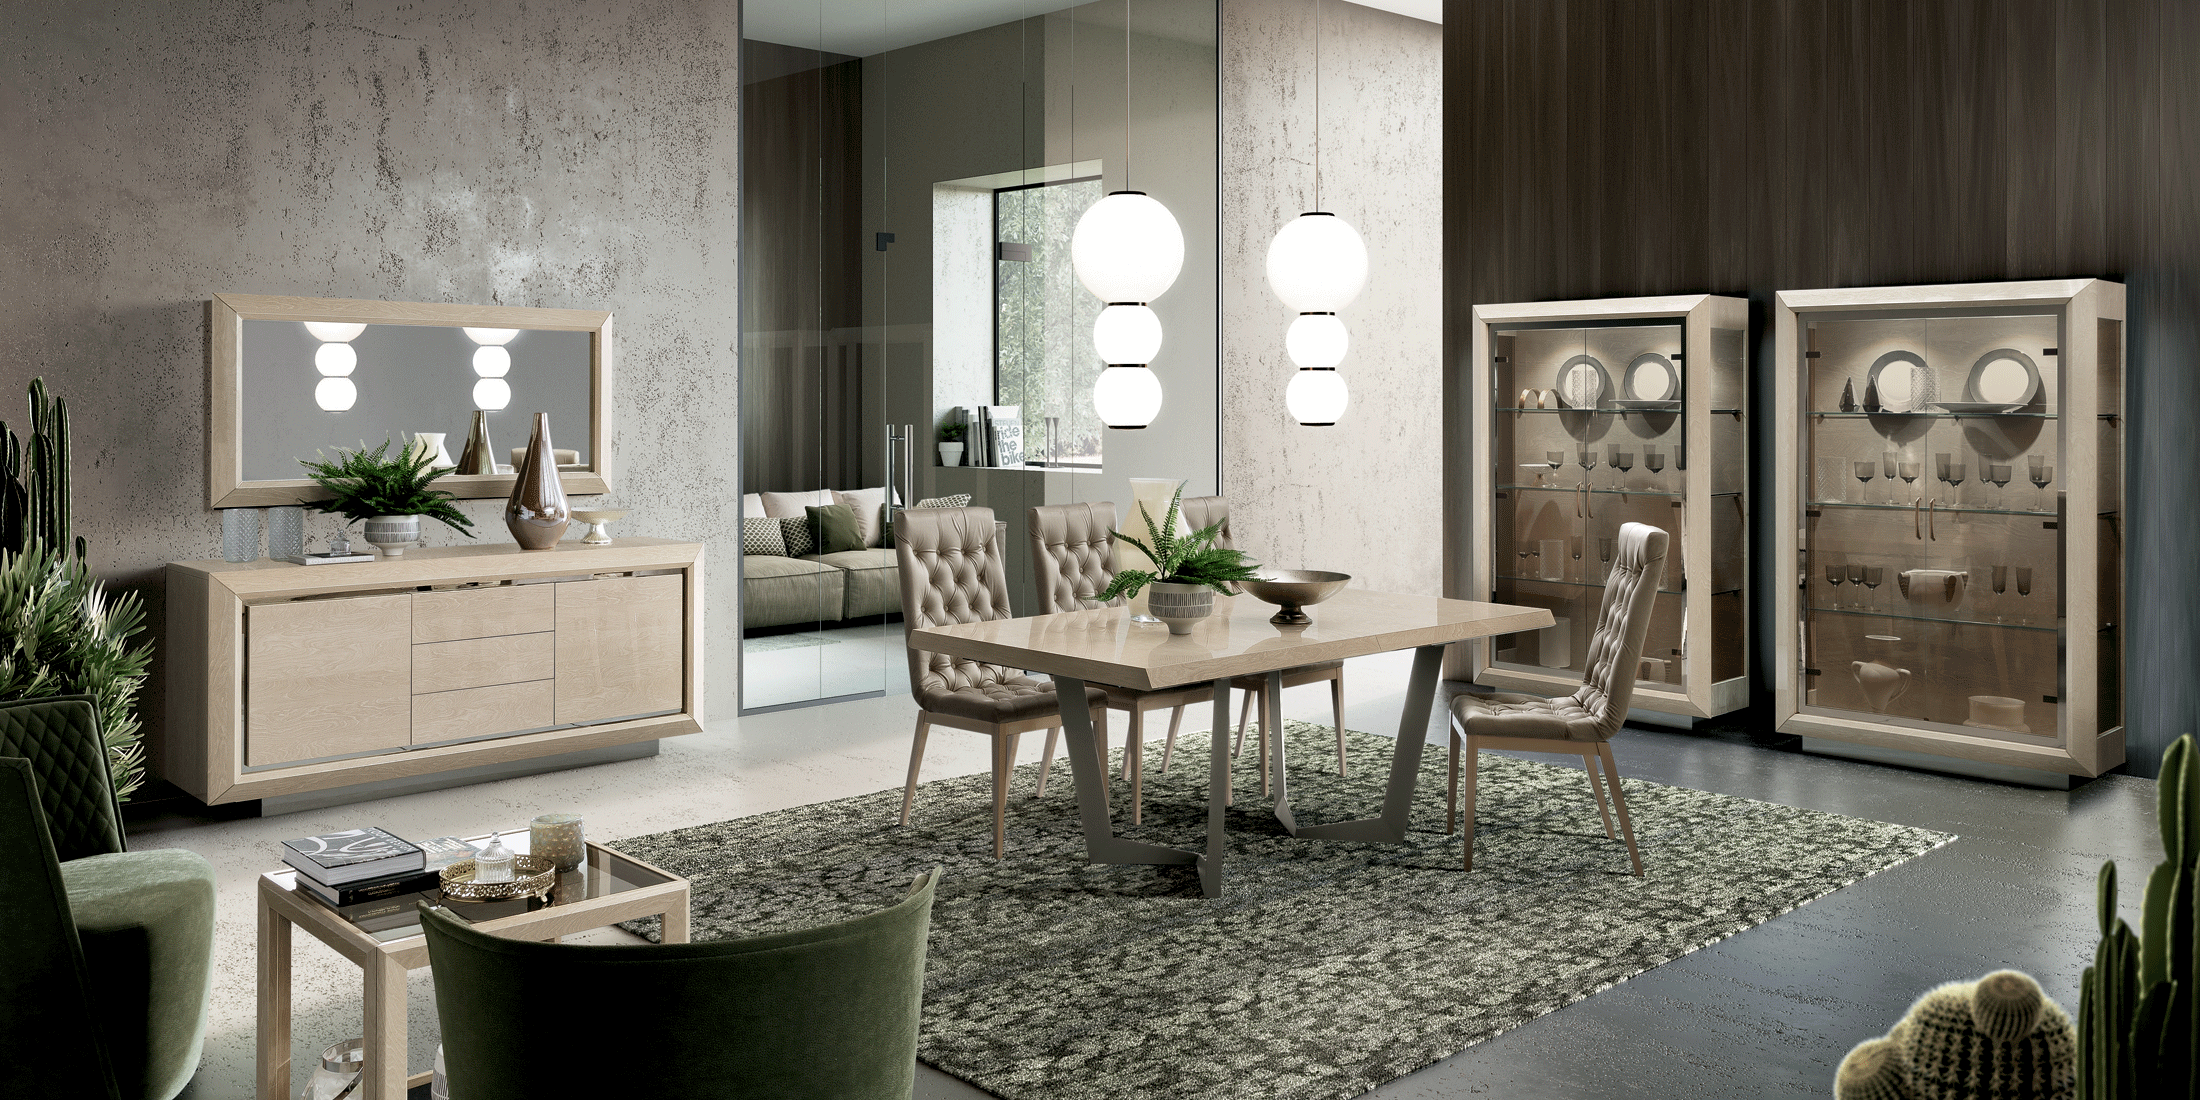 Wallunits Hallway Console tables and Mirrors Elite Dining Ivory Additional Items